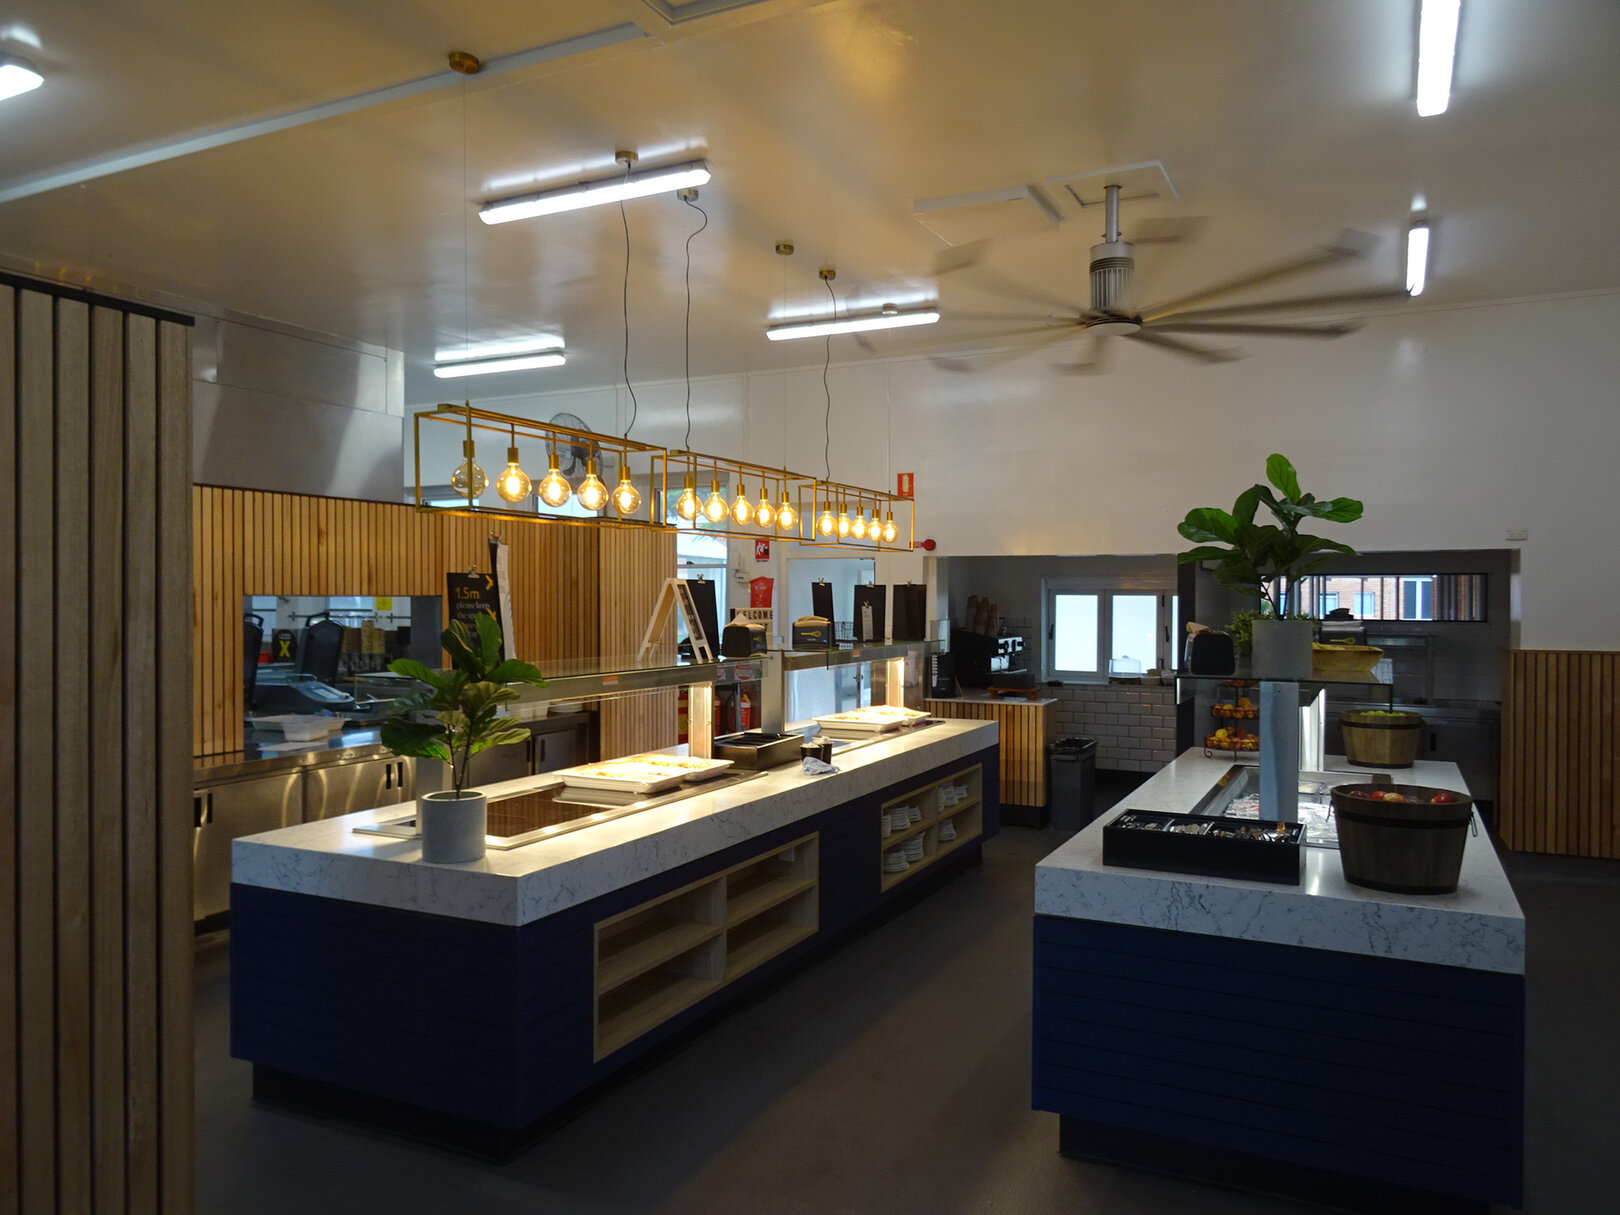 A modern commercial kitchen.